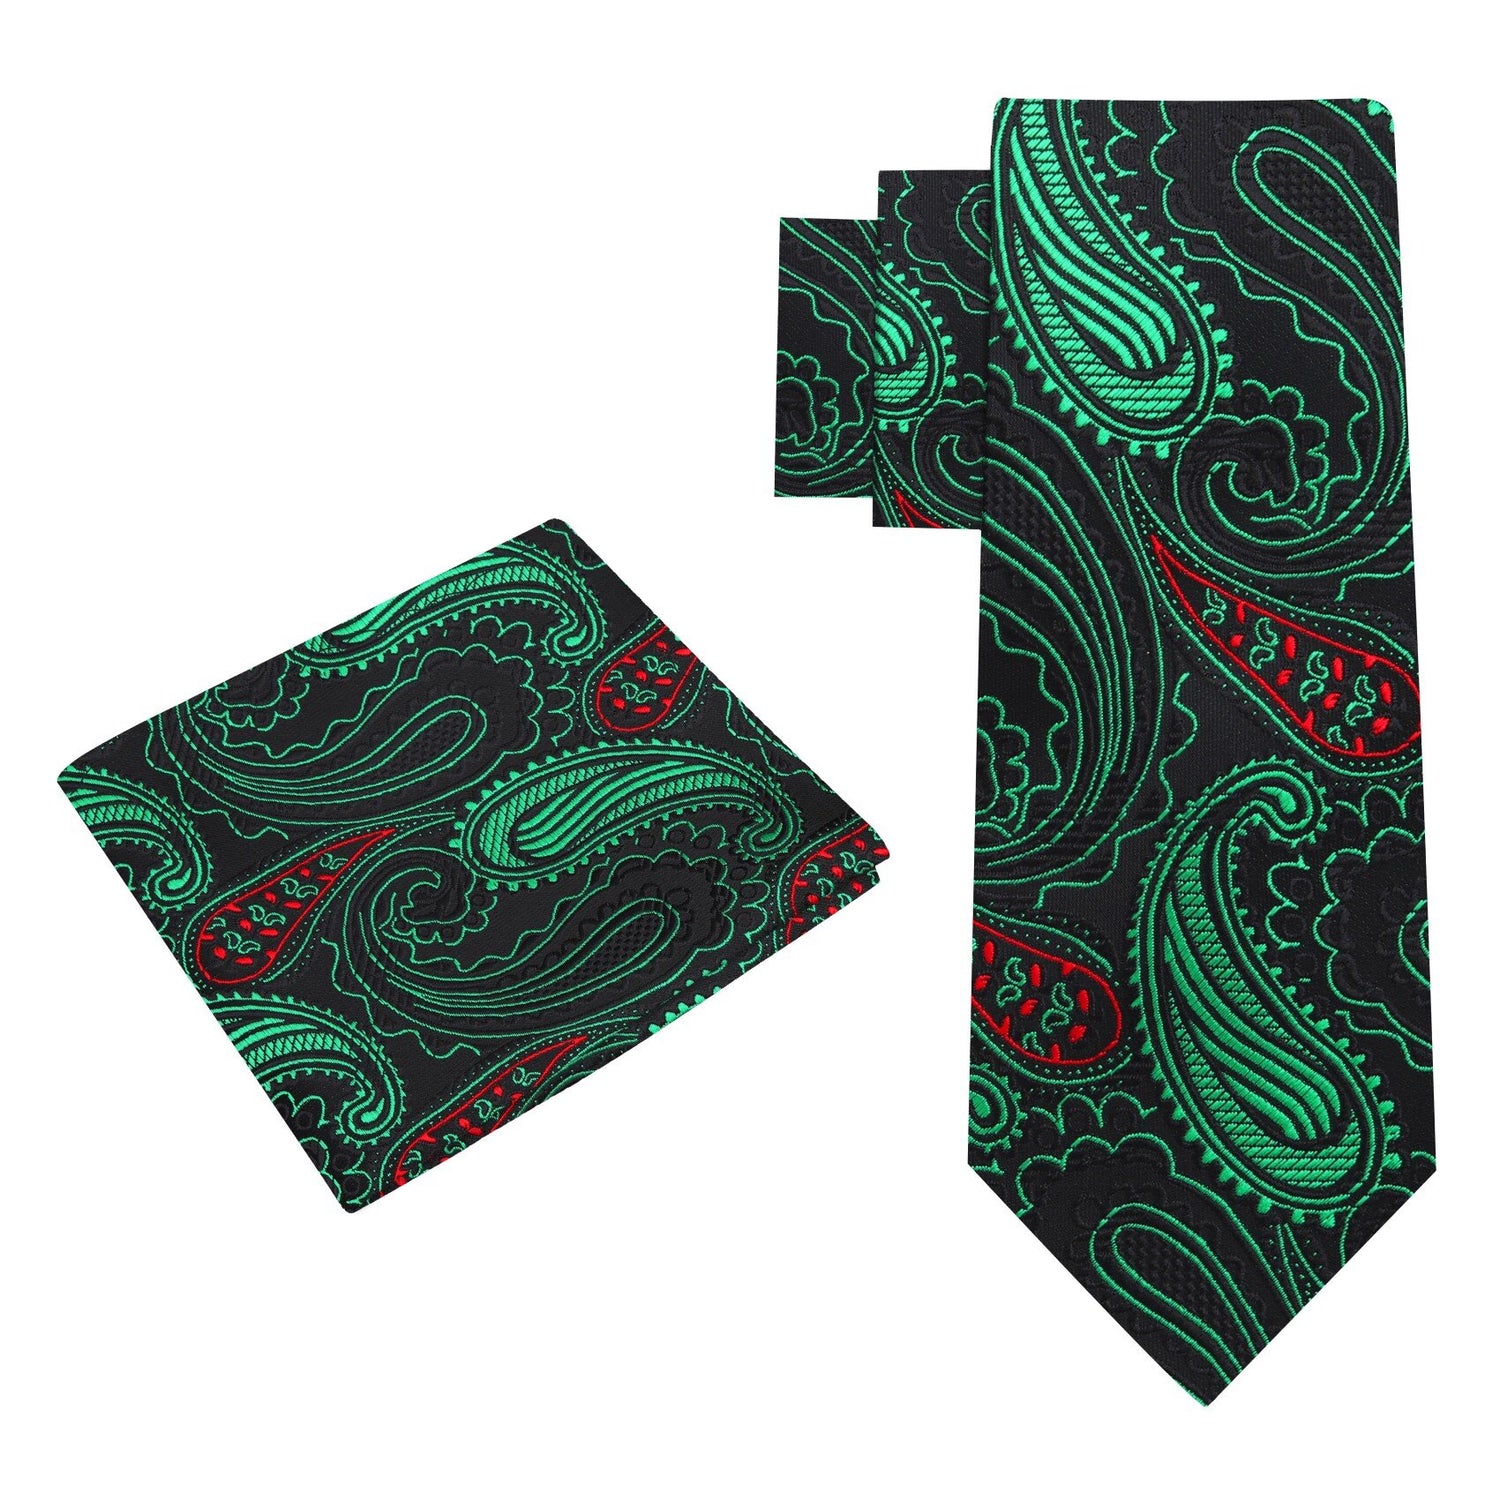 Alt View: Black, Green, Red Paisley Tie and Pocket Square